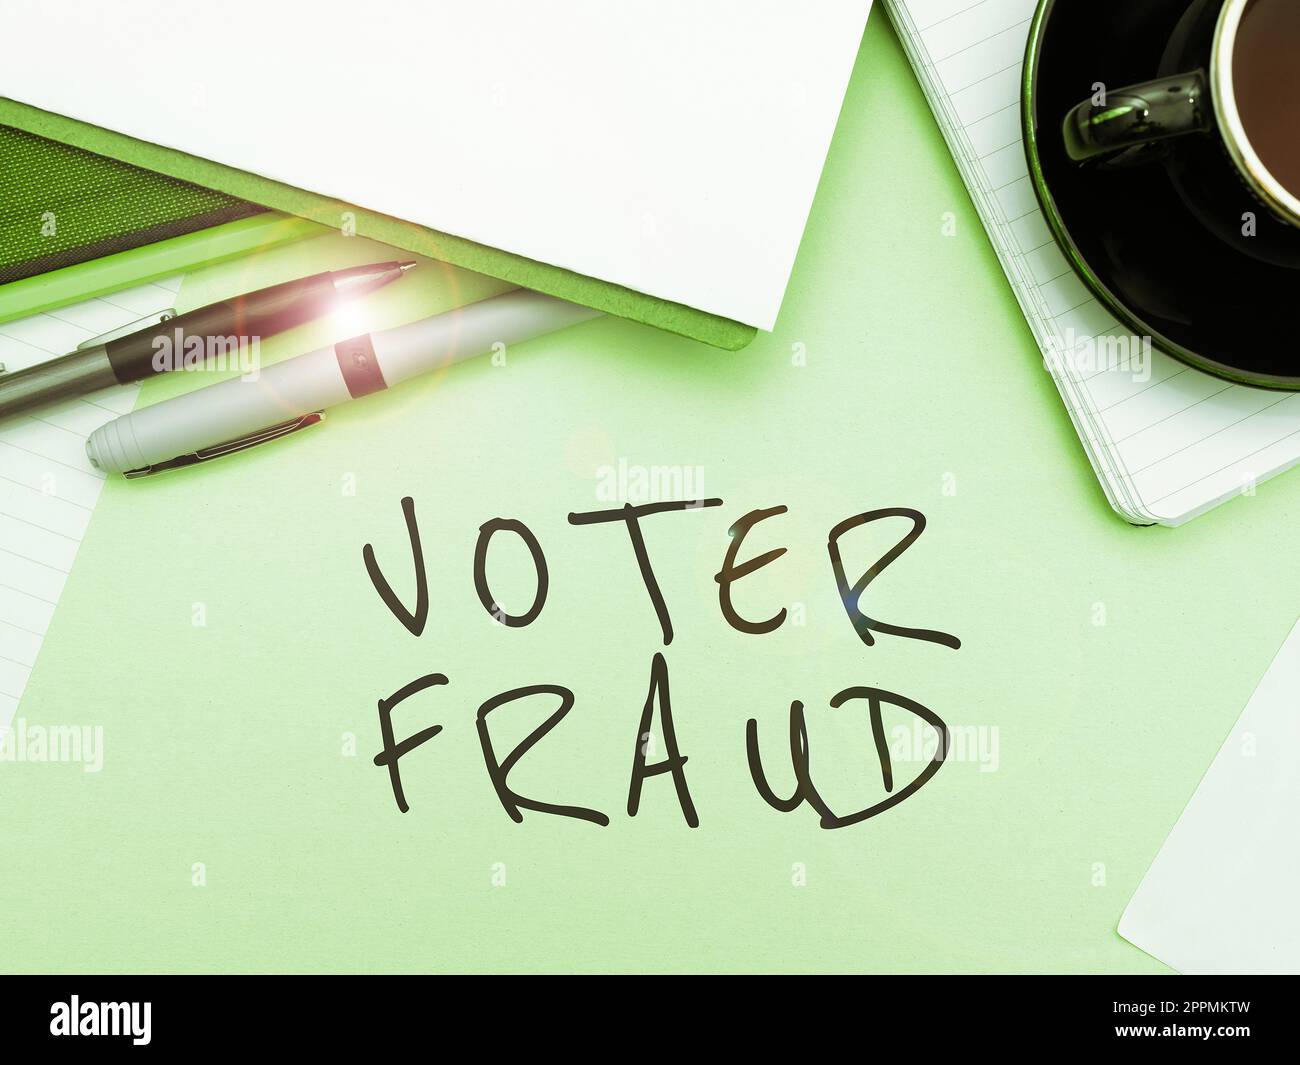 Sign displaying Voter Fraud. Word for formal indication choice between two or more candidates actions Stock Photo